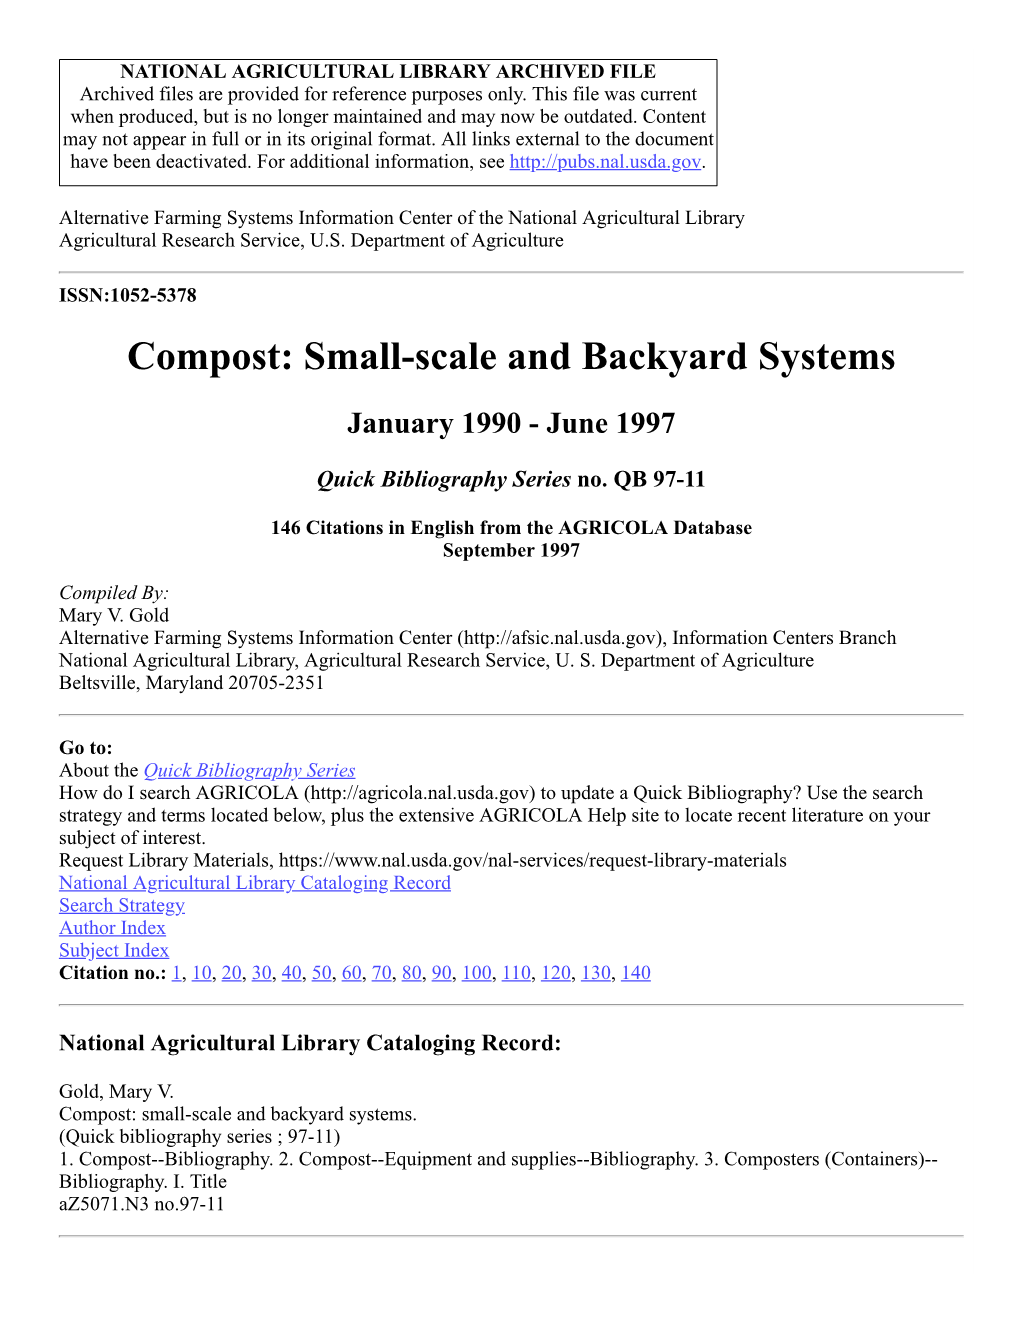 Compost: Small-Scale and Backyard Systems